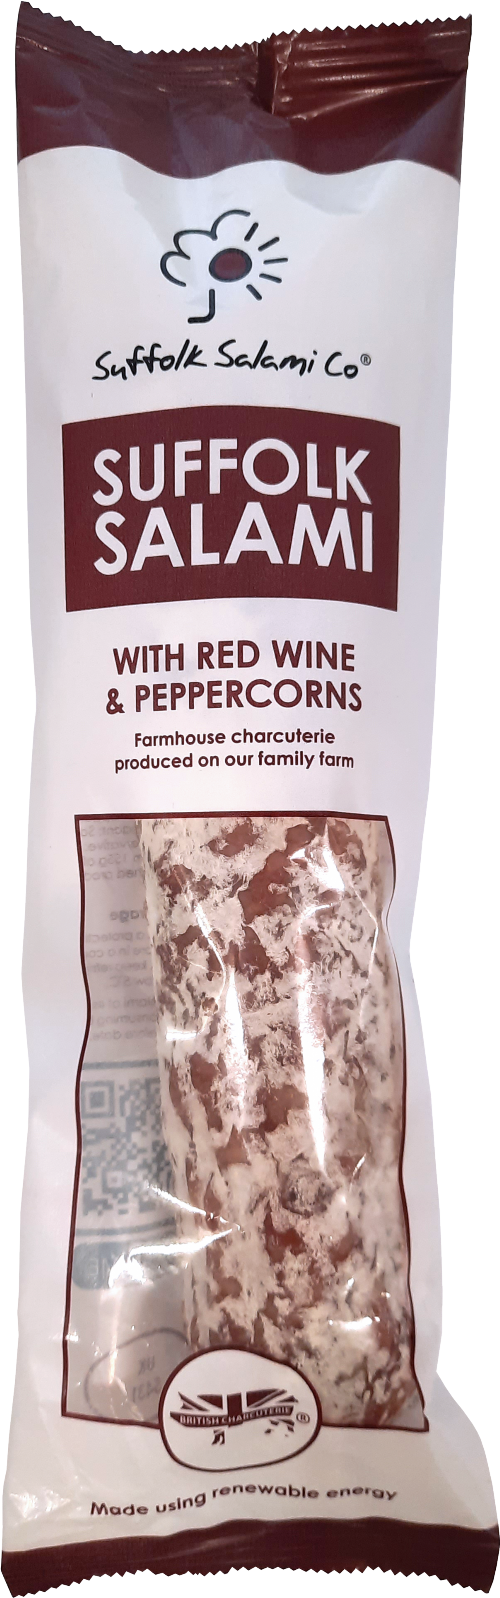 SUFFOLK SALAMI CO. Salami with Red Wine & Peppercorns 220g